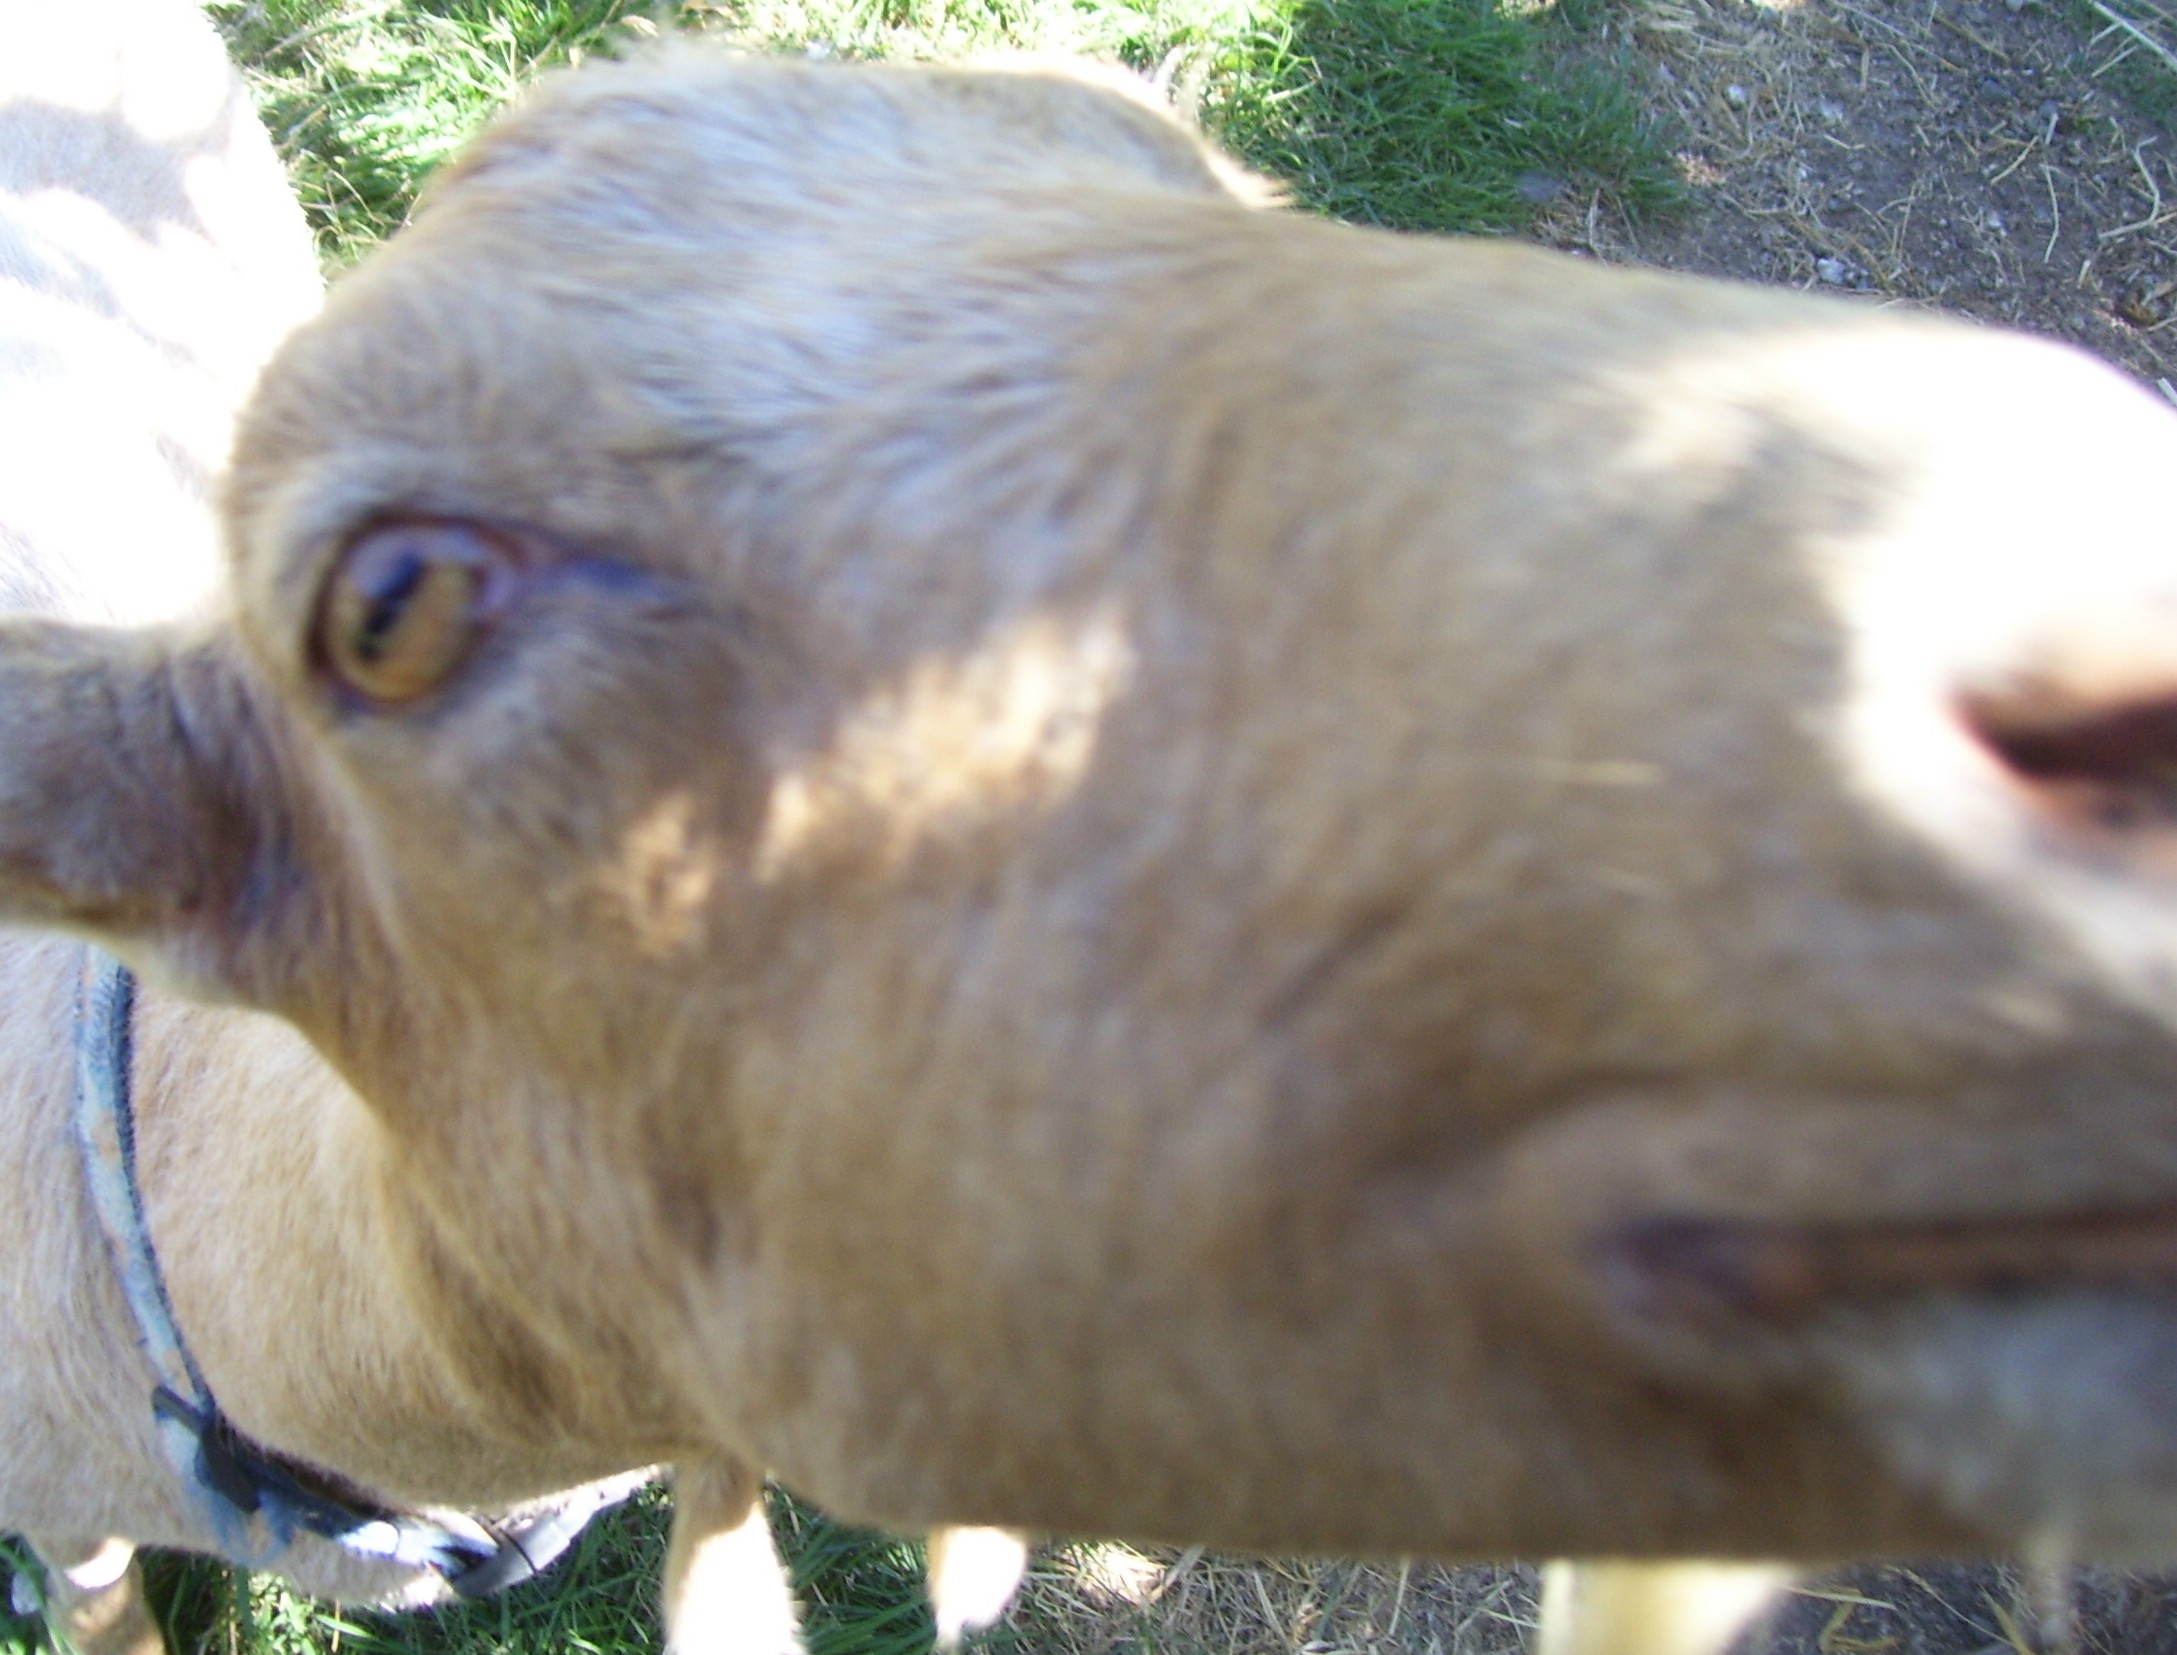 one of my goat friends at Borges Ranch